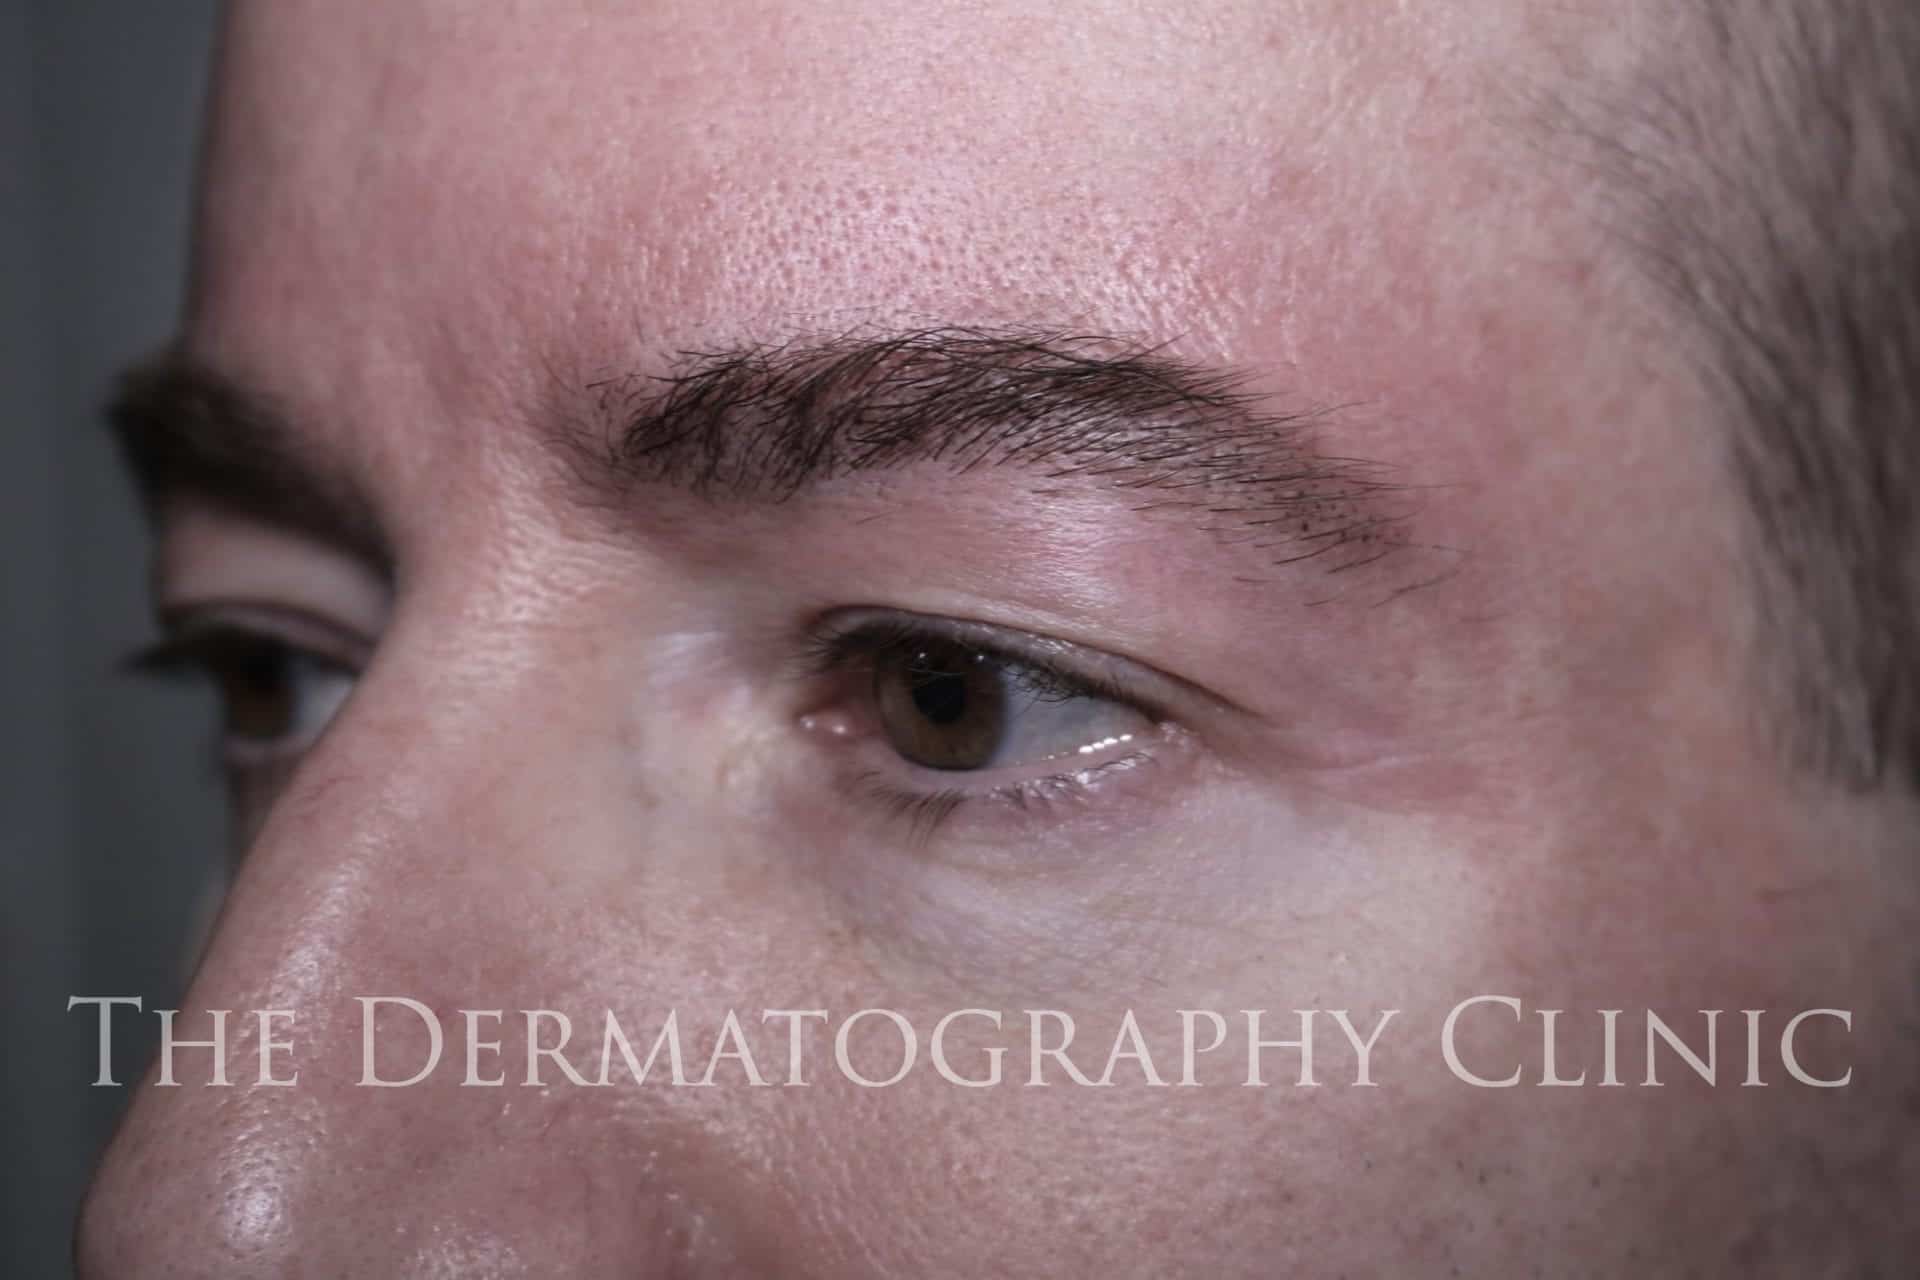 Eyebrow Tattoo For Men - The Dermatography Clinic